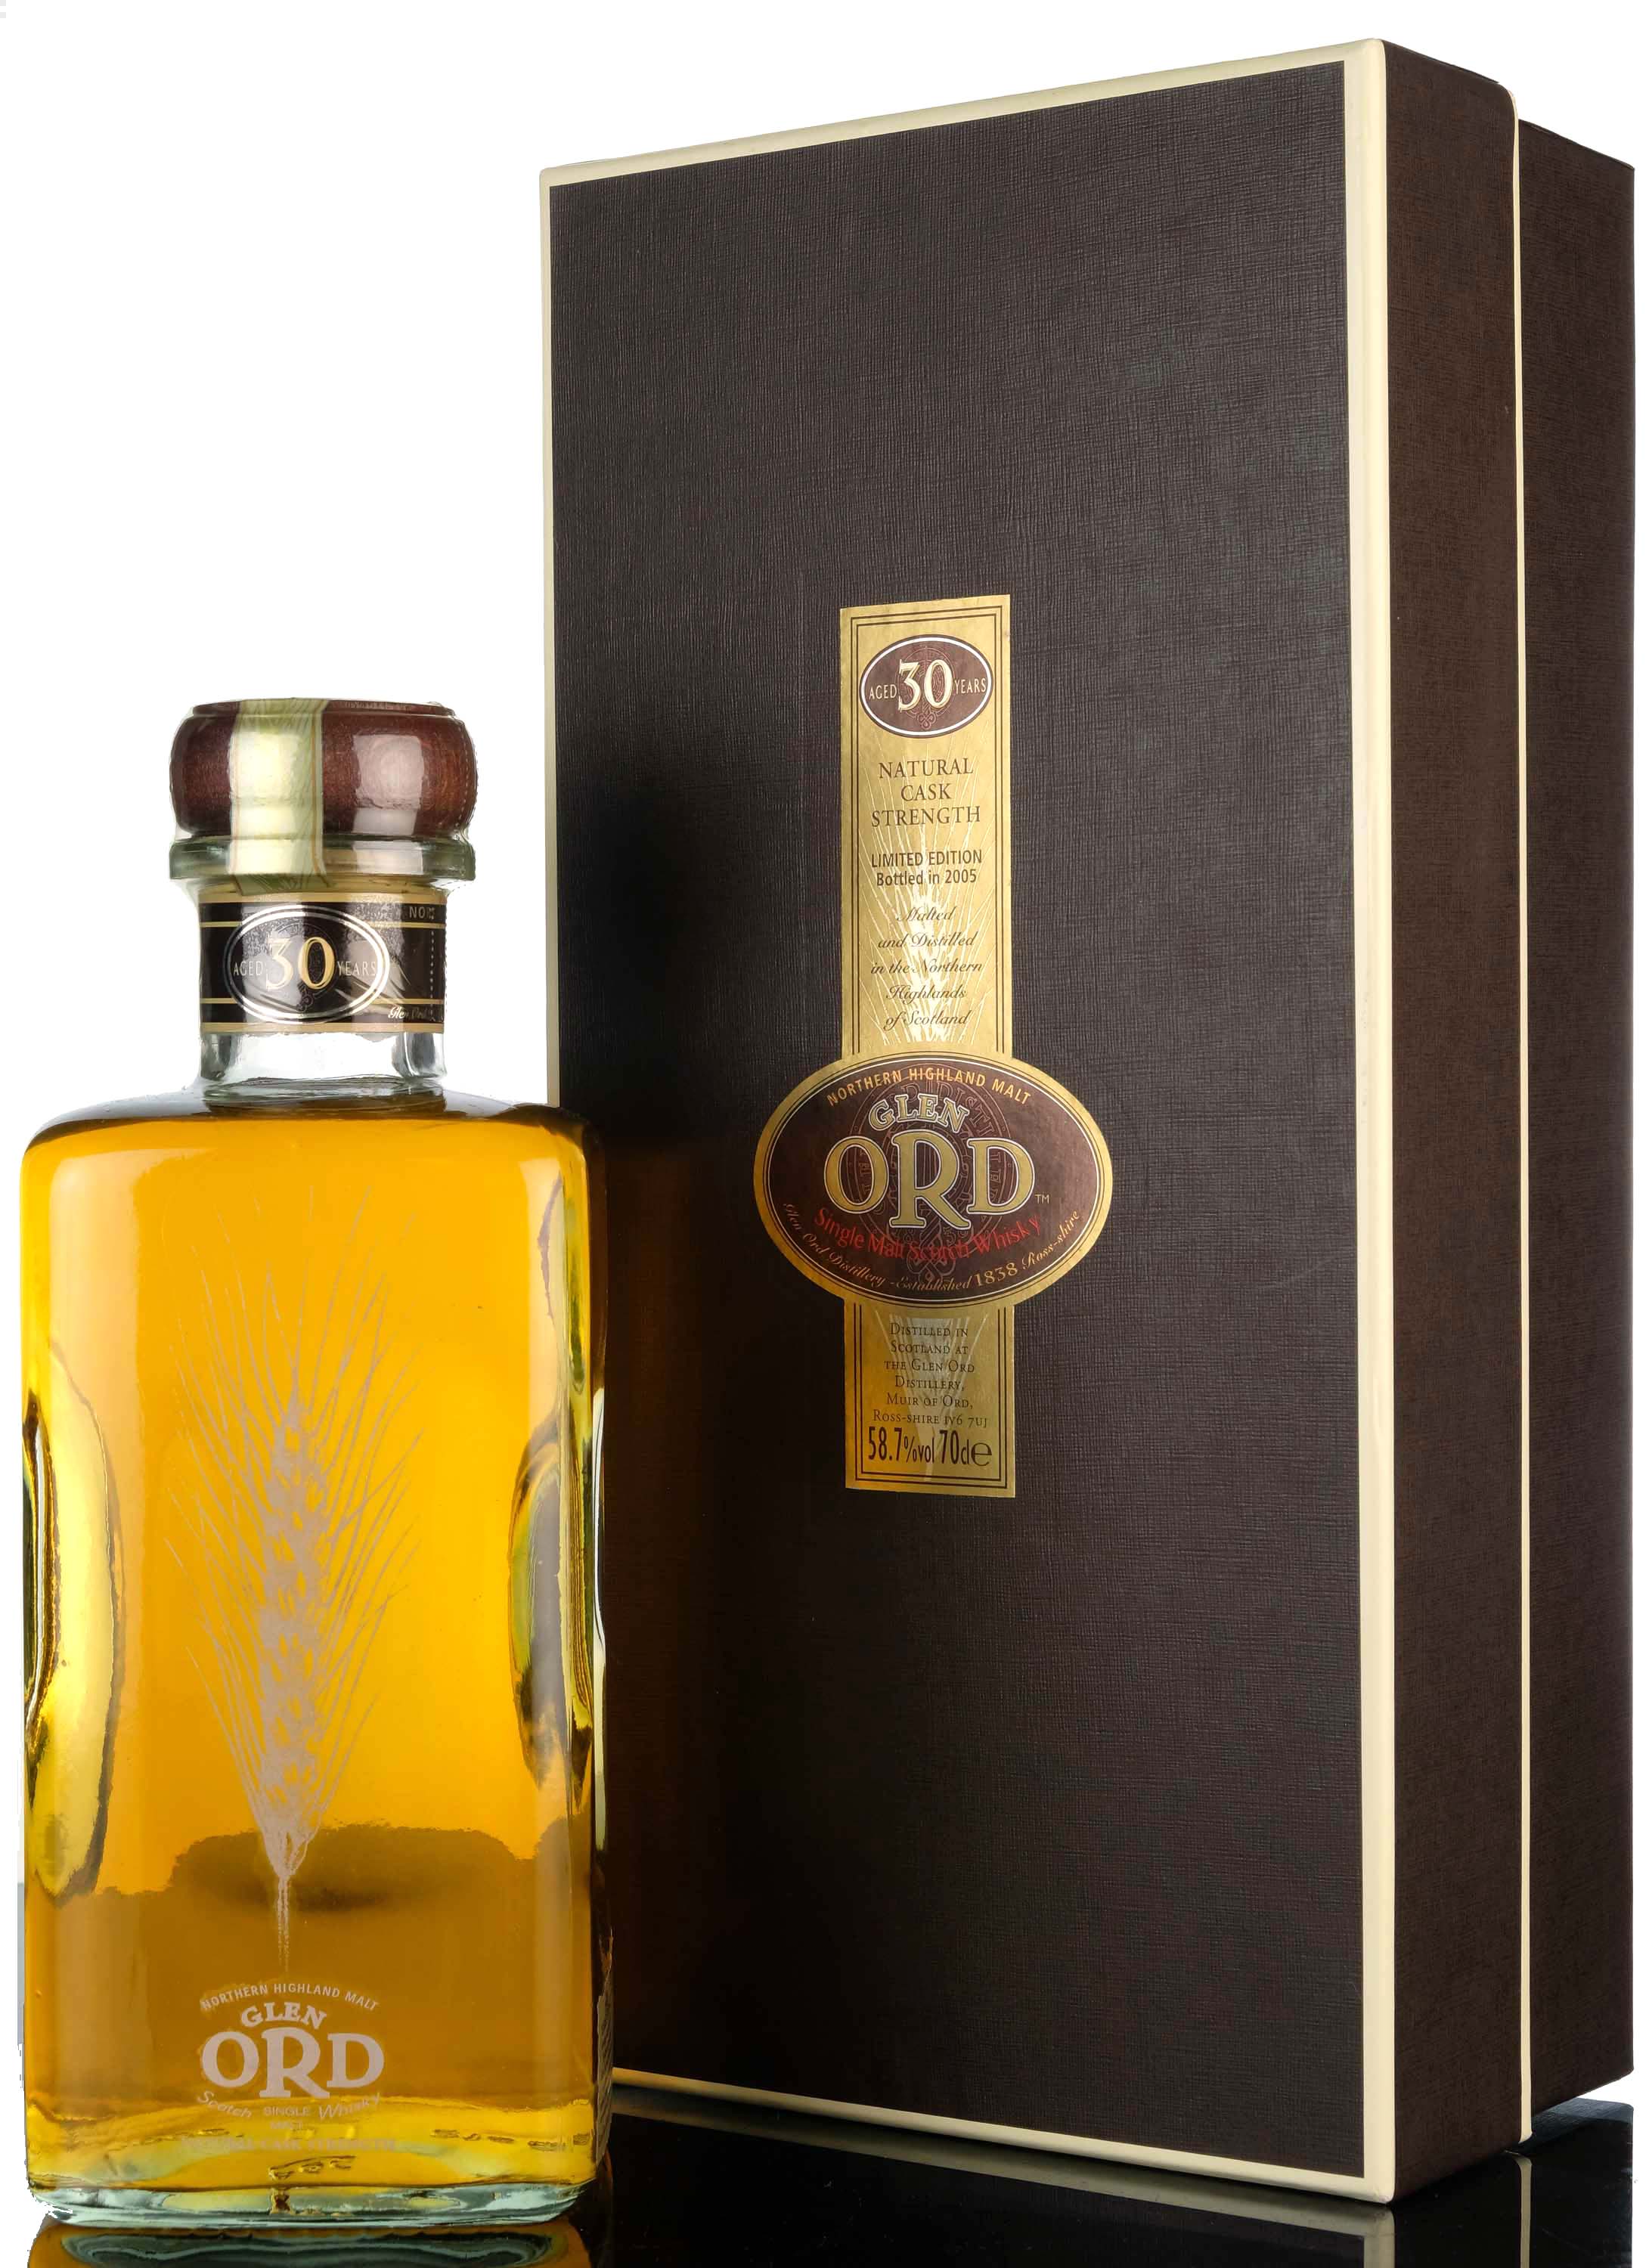 Glen Ord 30 Year Old - 2005 Special Release